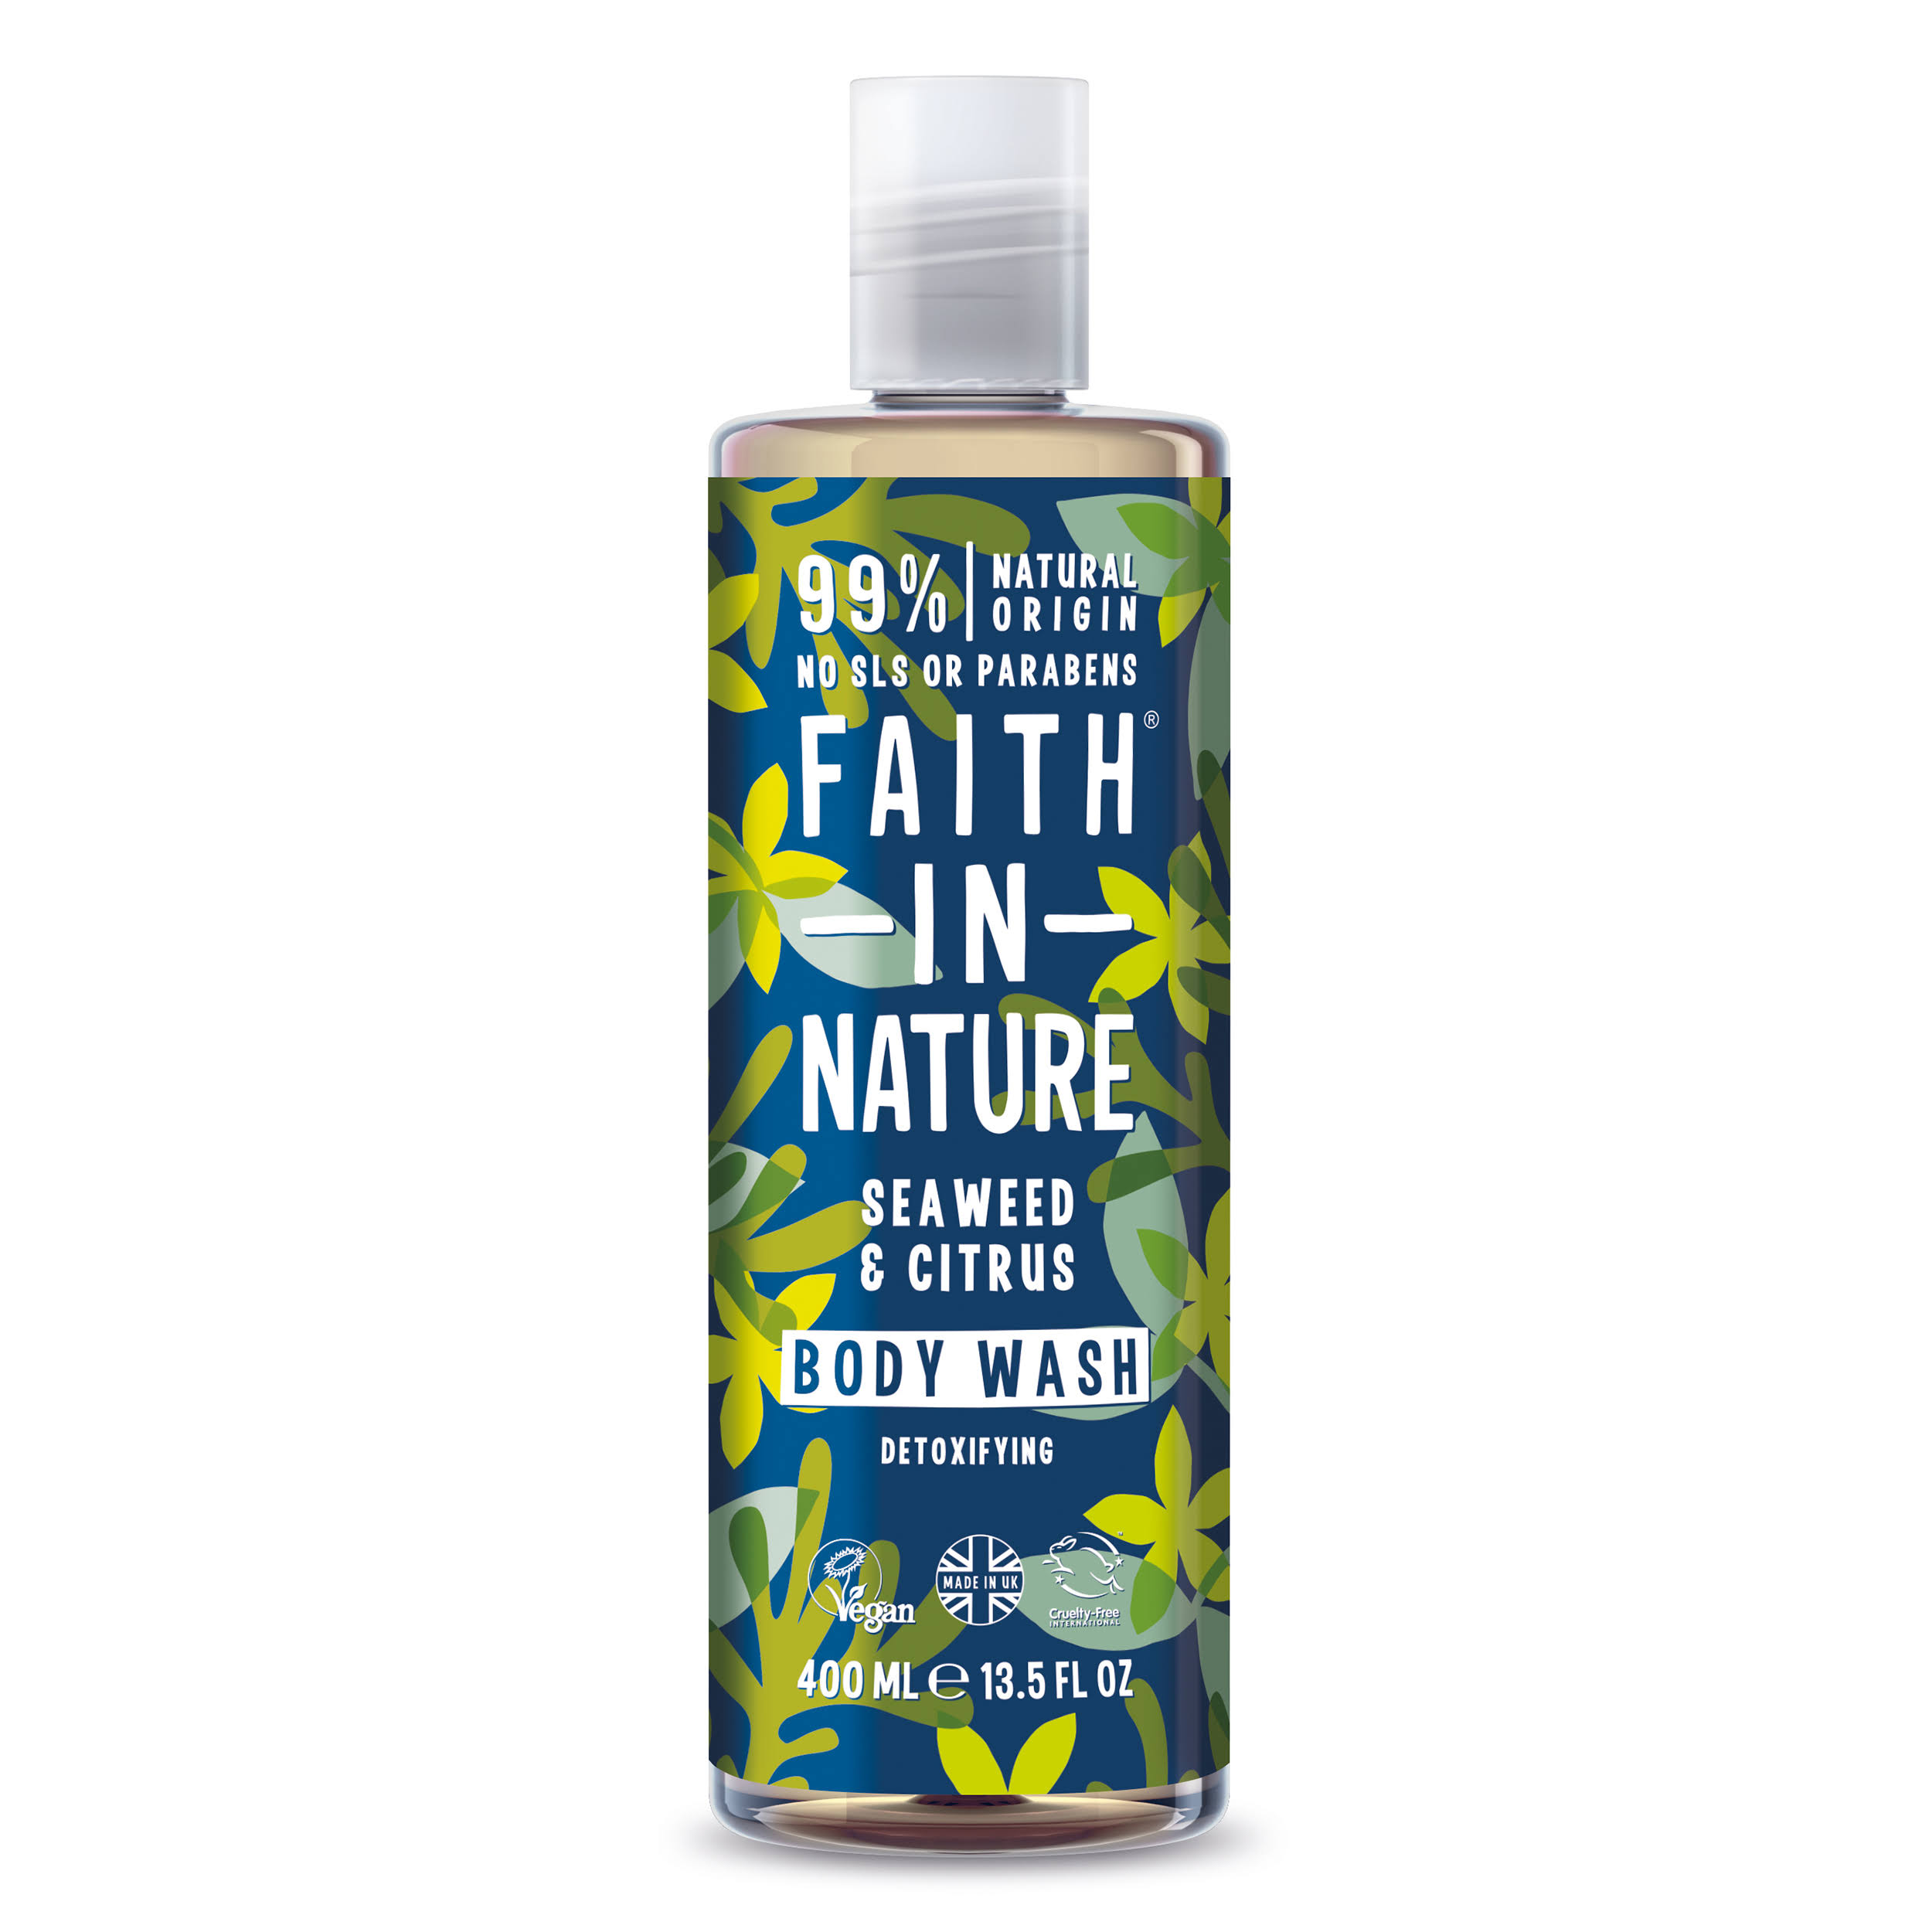 Faith in Nature Body Wash - Seaweed and Citrus, 400ml